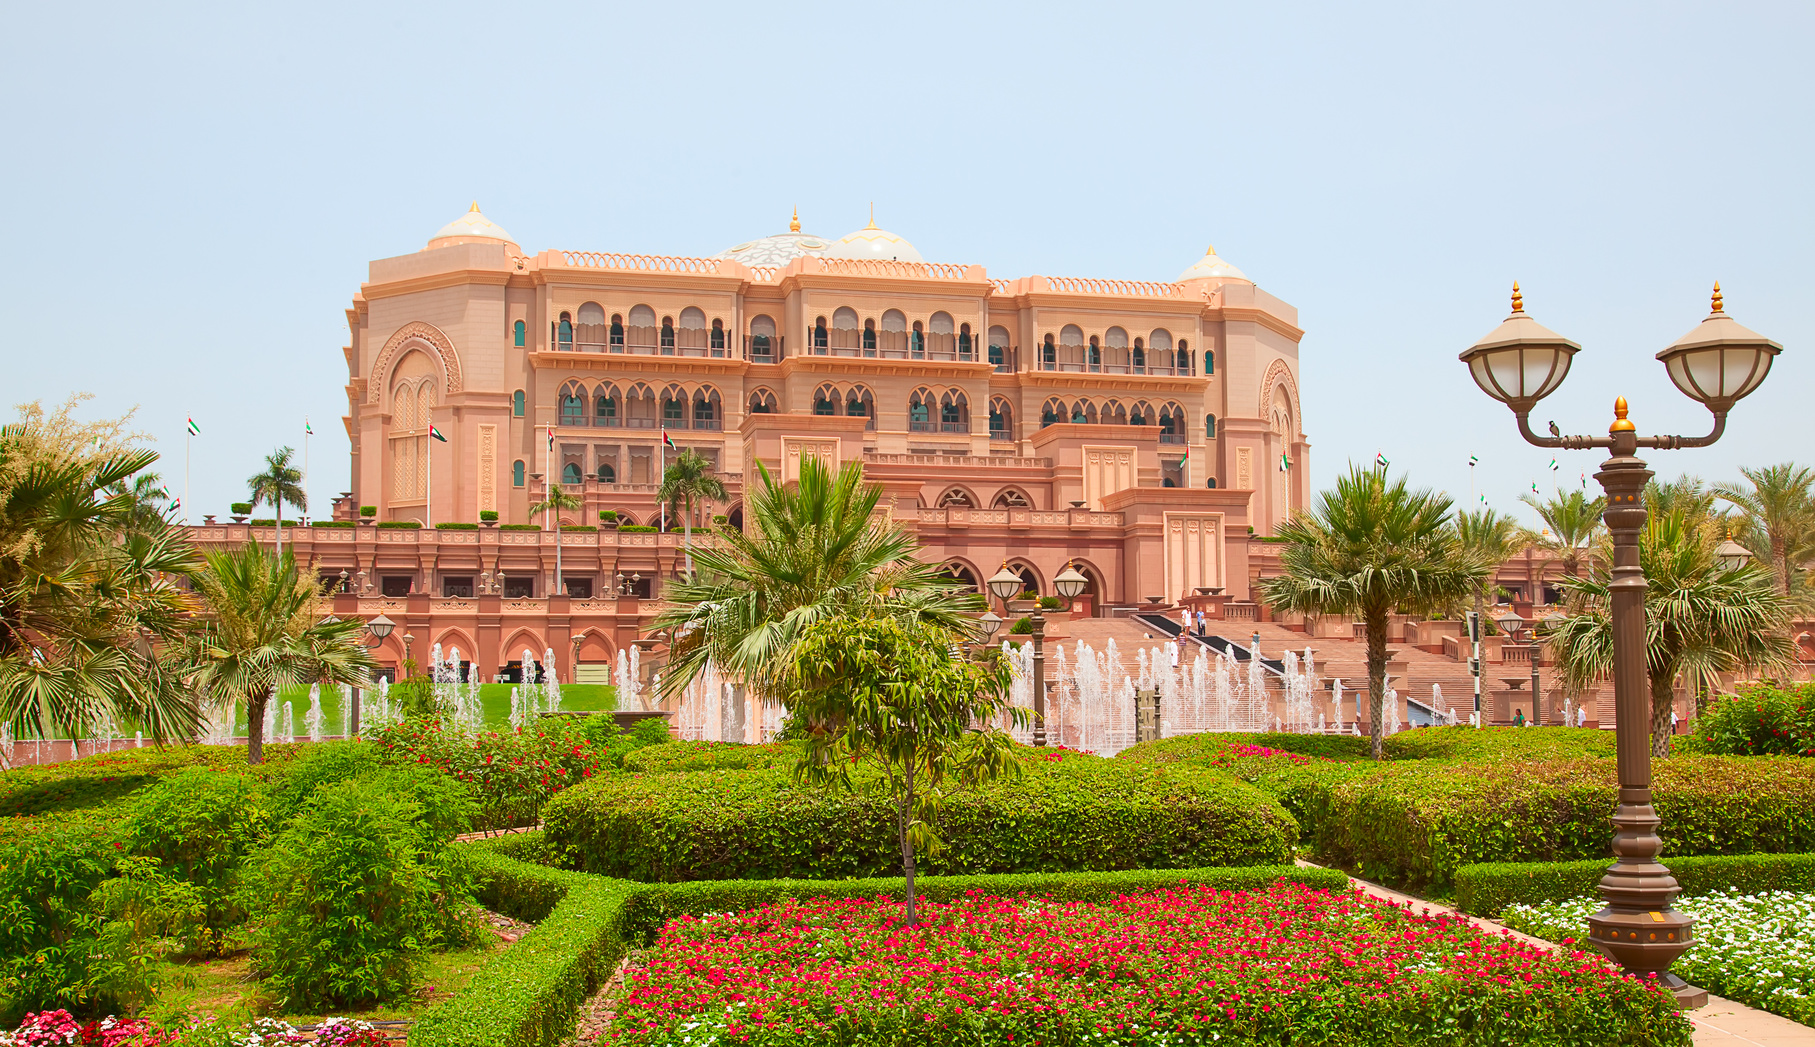 ABU DHABI, UAE - APRIL 27: Emirates Palace hotel facade on April 27, 2014, UAE. Seven stars Emirates Palace is the second most expensive hotel ever built for about 6 billion USD.